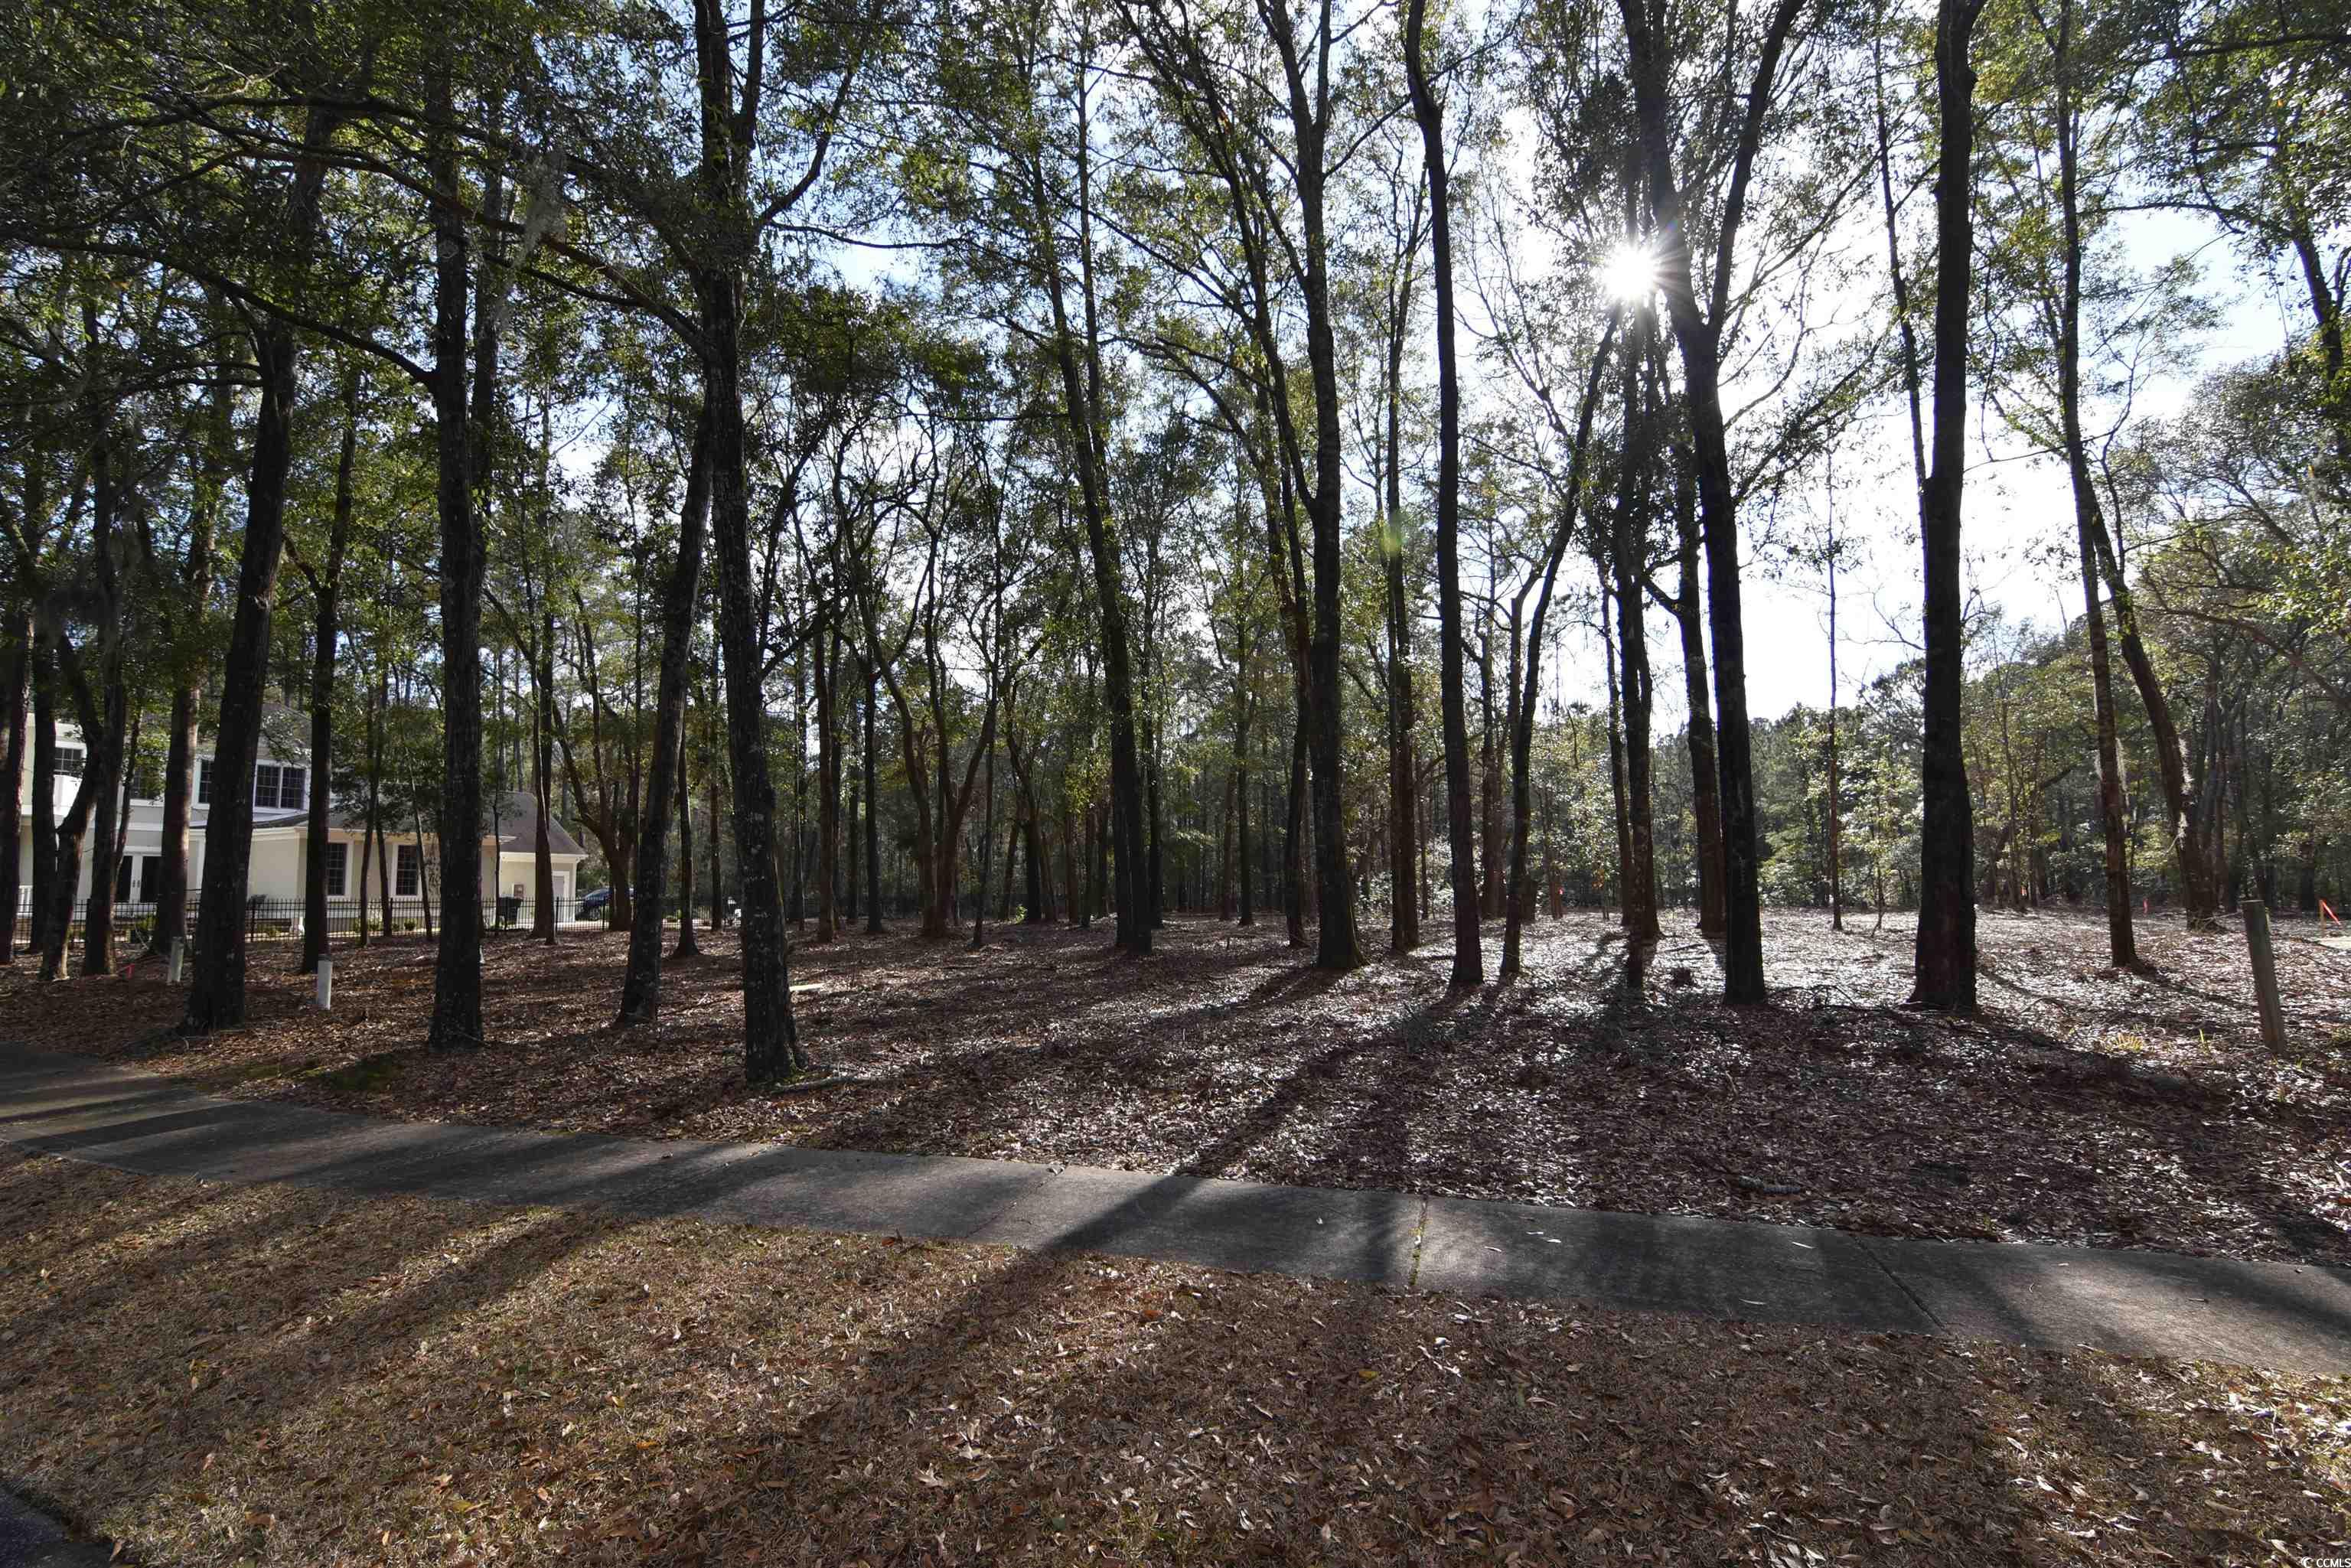 package deal for 2 lots and a 26' boat slip.  each lot is .28 of an acre side by side.  lot 16 is on the corner.  you can build one home on each lot or build a large home and combine both lots. harmony township is located in georgetown just up the sampit river from historic downtown front street. the sampit river provides deep water access to the icw that is just around the corner, which has direct access out to the atlantic ocean. there are underground utilities at the street in place and a community dock for harmony township owners.  this community is paradise for boaters! it has walking trails, paved streets, freshwater fishing ponds surrounded by woods and marshlands. it is situated on the south side of georgetown and less than 1 hour to charleston - no time frame in place to build.  call today for details!